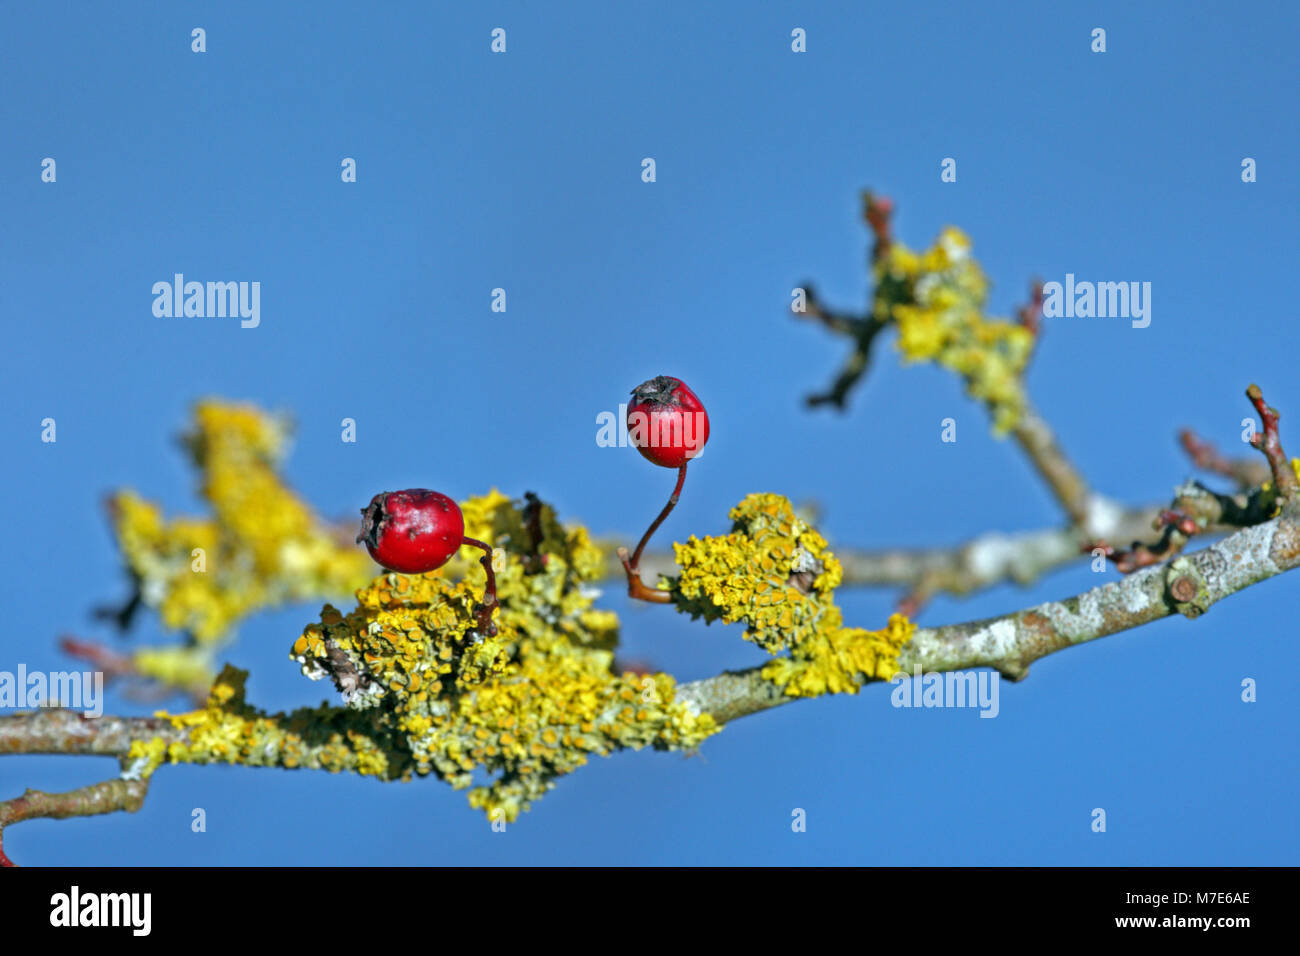 Yellow lichen covers a hawthorn branch with two red berries against a blue sky. Stock Photo